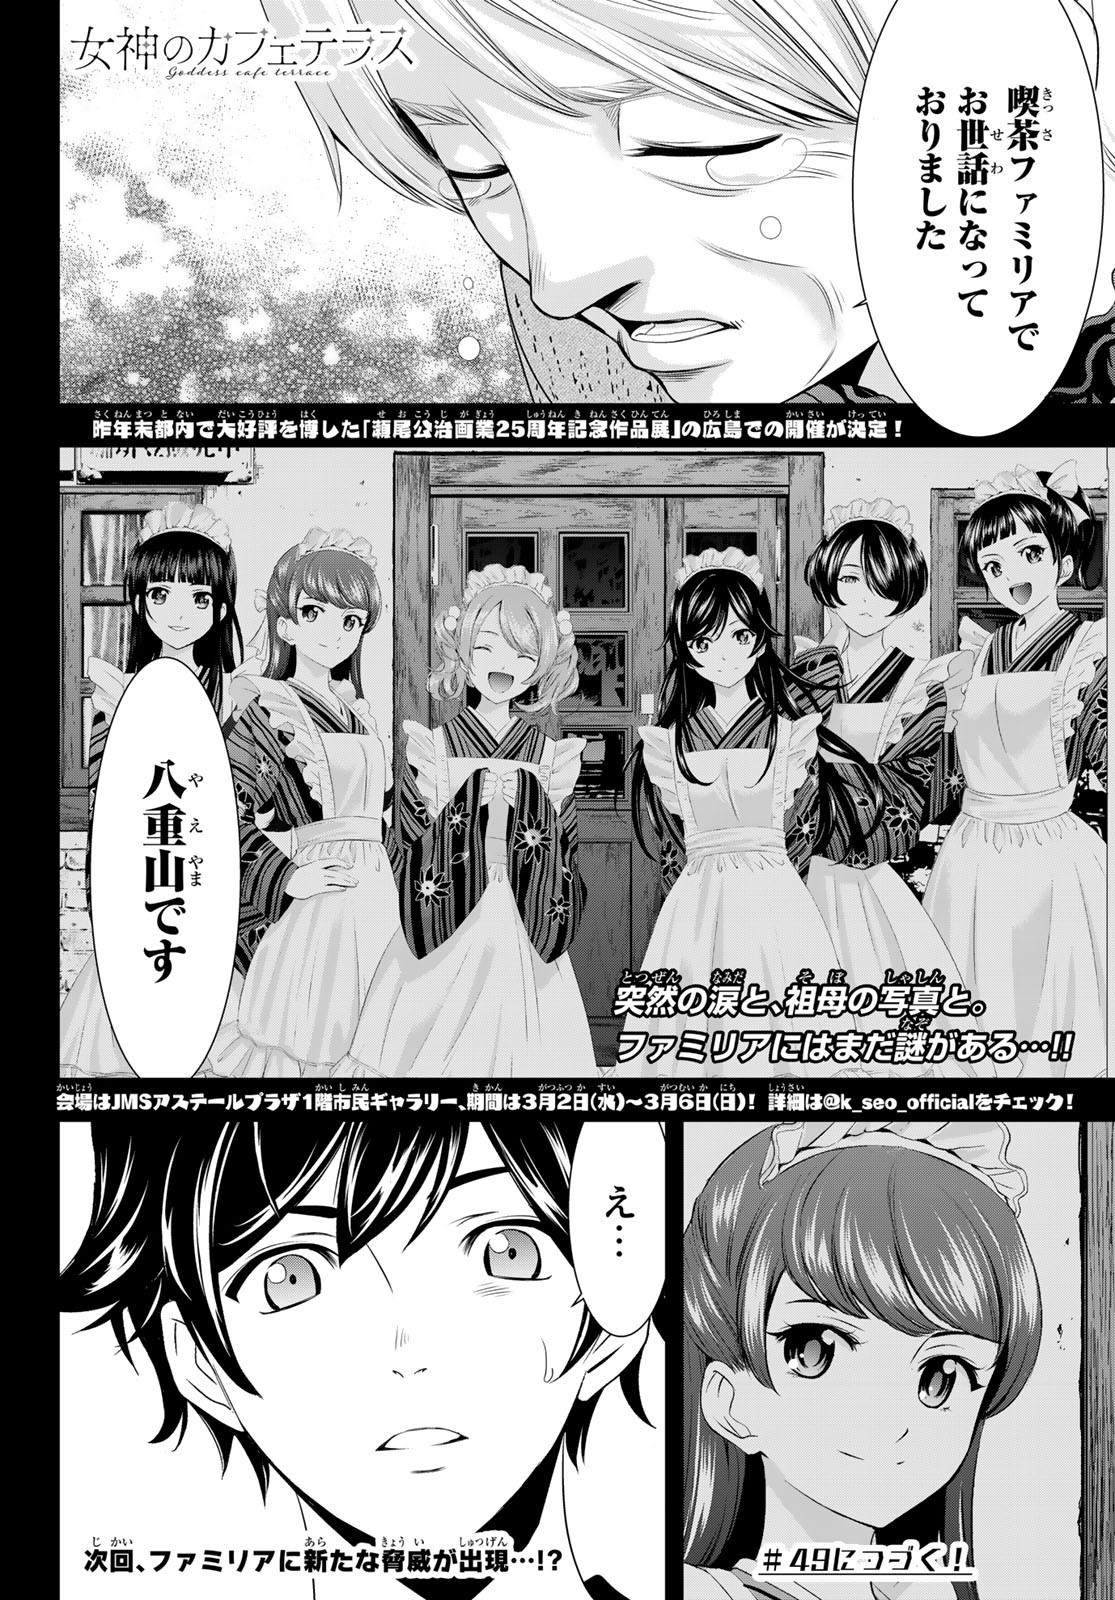 Goddess-Cafe-Terrace - Chapter 048 - Page 18